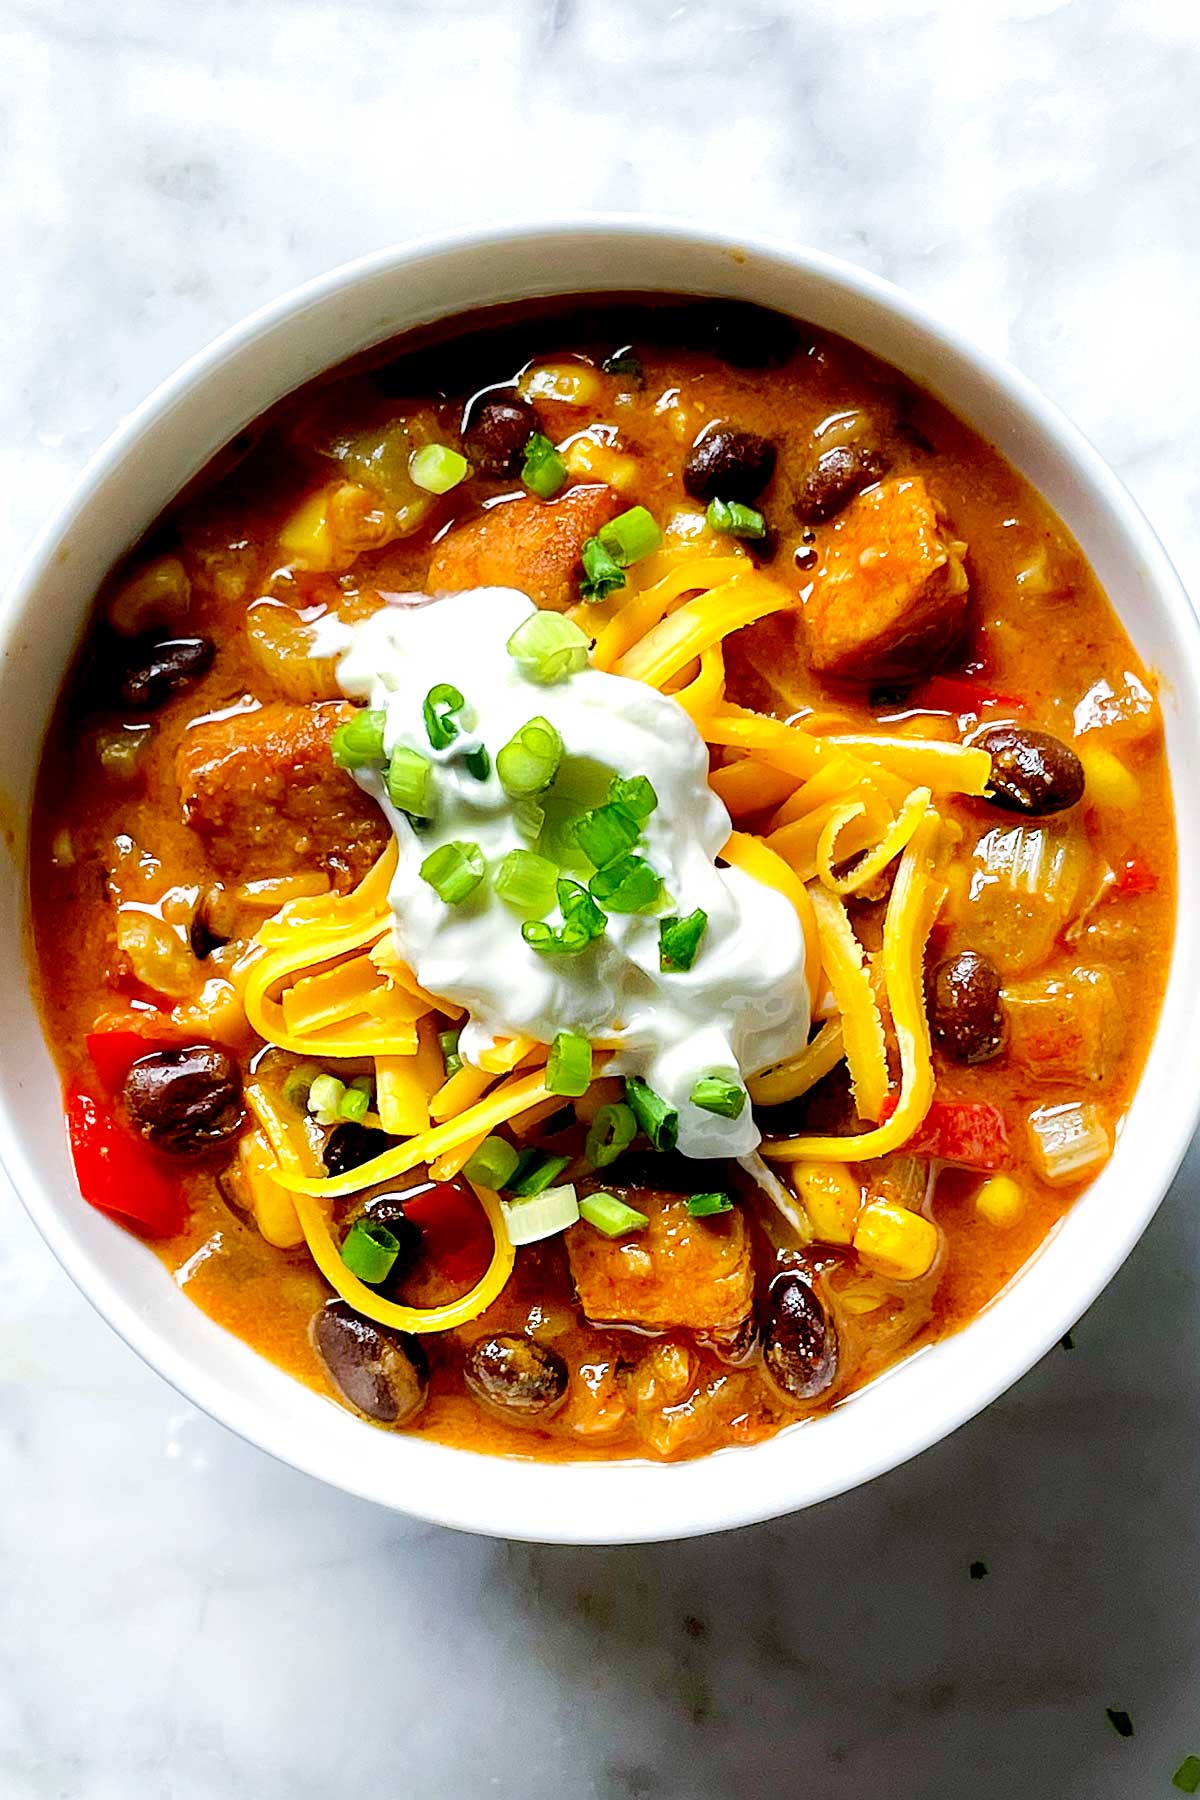 Deer Valley's Famous Turkey Chili